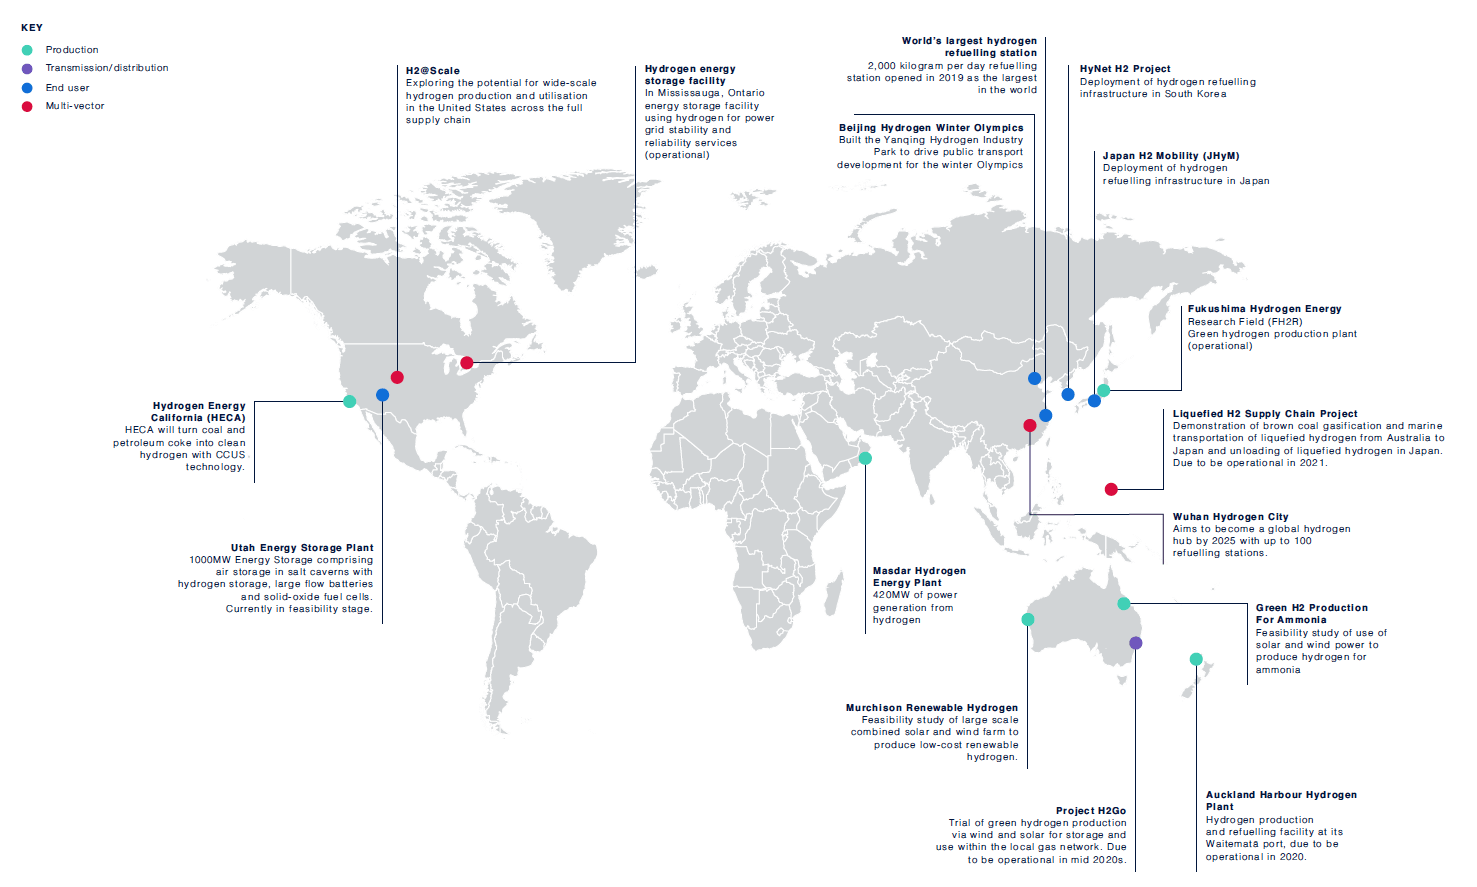 Examples of hydrogen projects globally 23
This figure shows a summary of some of the hydrogen projects that are being developed globally. Four different categories have been established for these projects. These are ‘production’, ‘transmission/distribution’, ‘end user’ and ‘multi-vector’. The projects displayed include the Hydrogen Energy California and the Utah Energy Storage Plant developed in the USA, the Masdar Hydrogen Energy Plant in the United Arab Emirates and, HyNet H2 Project in South Korea.